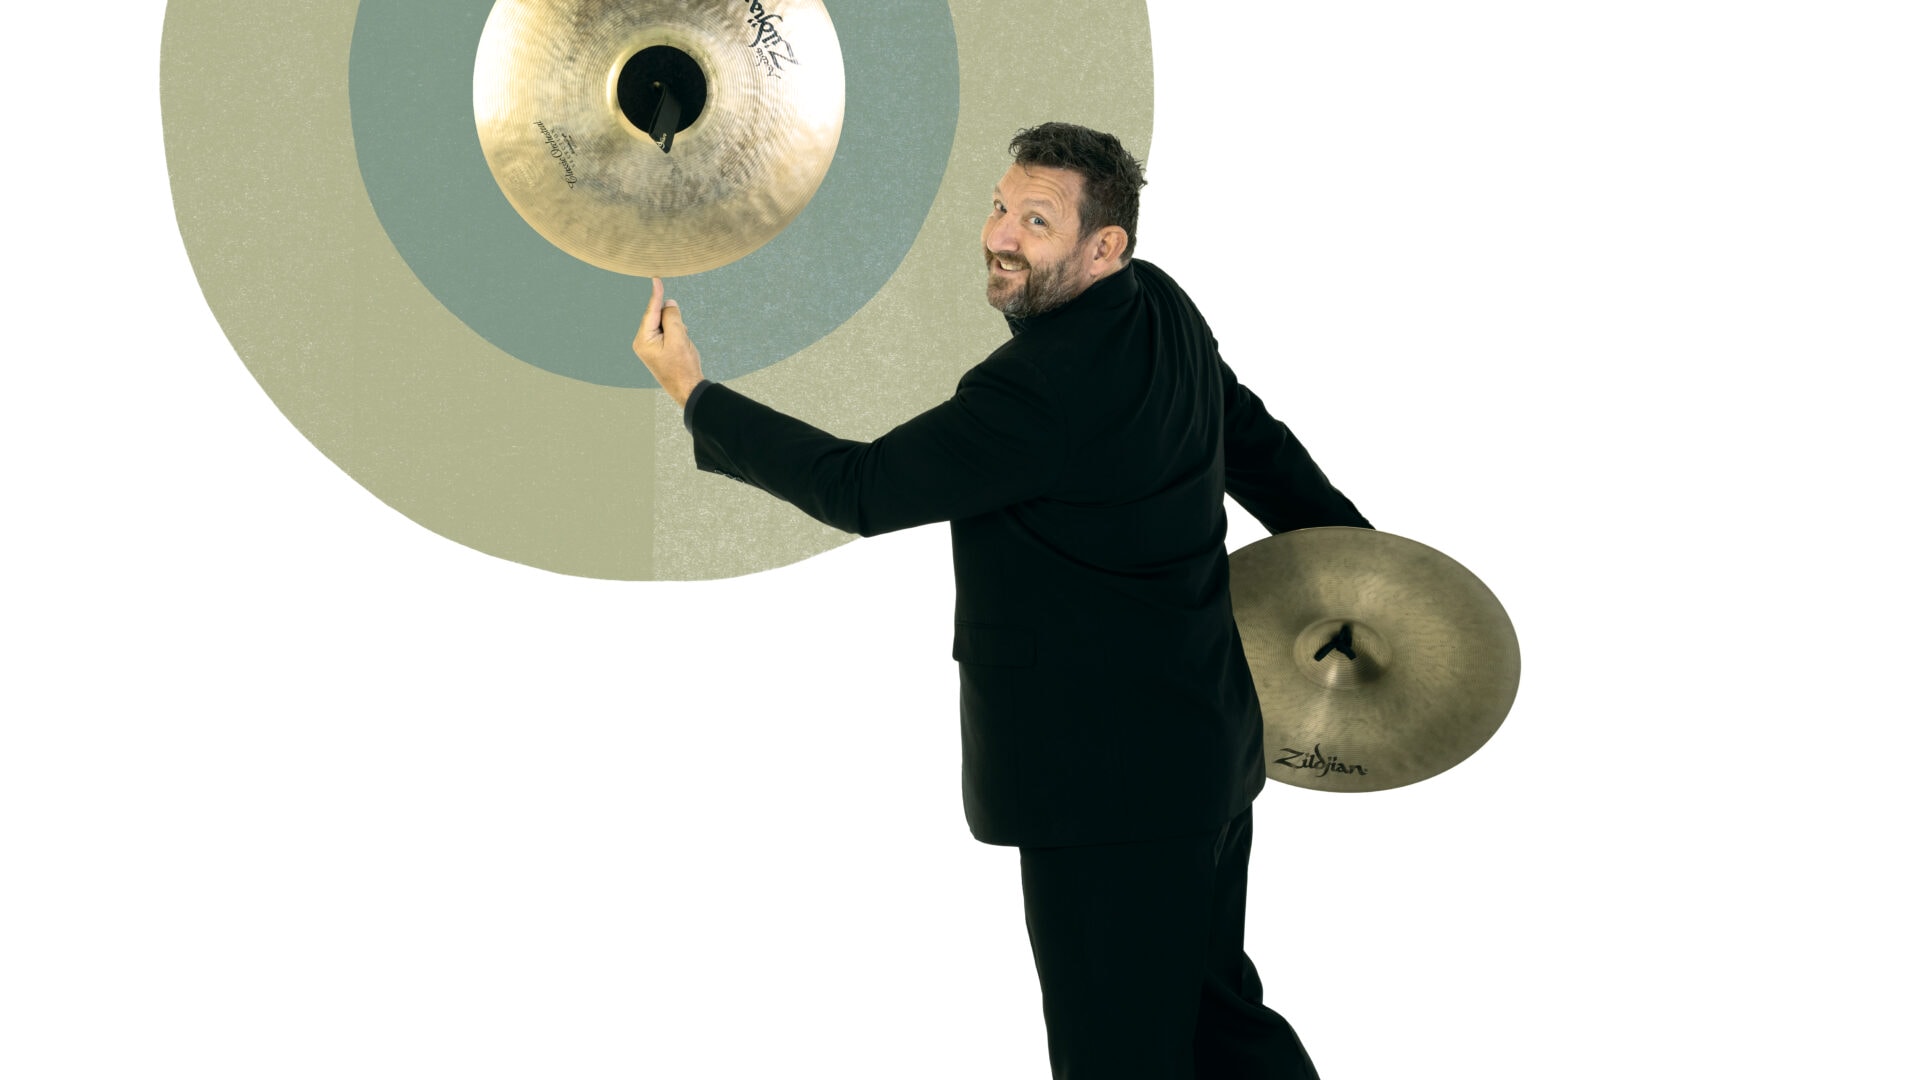 BSO musician posing with cymbals